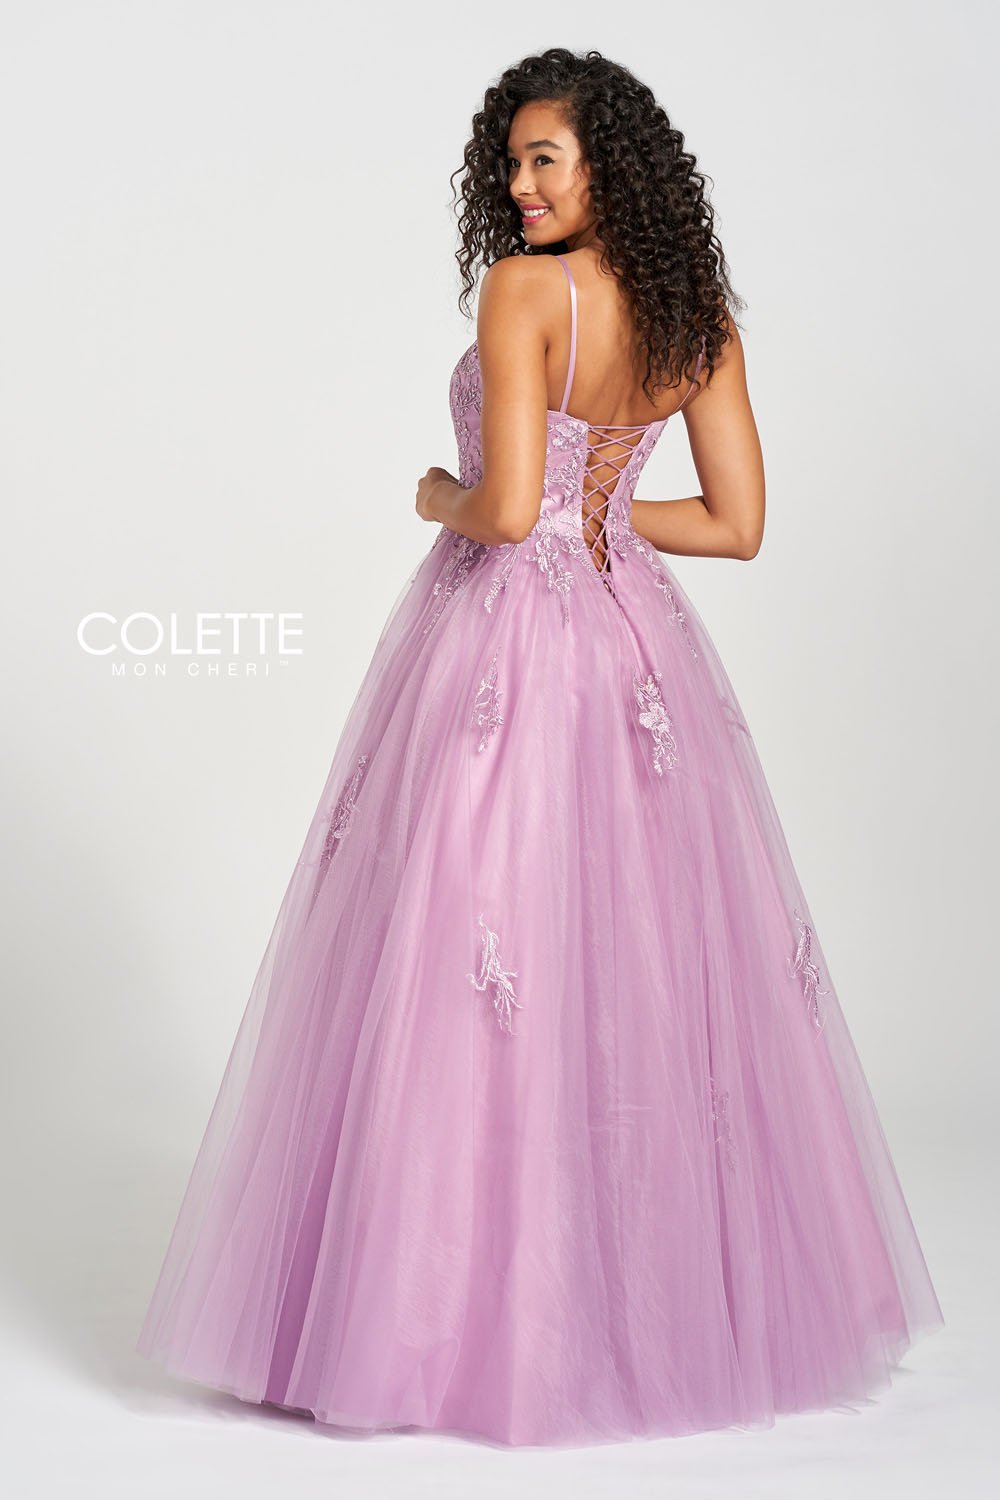 Colette CL12212 Orchid prom dresses.  Orchid prom dresses image by Colette.